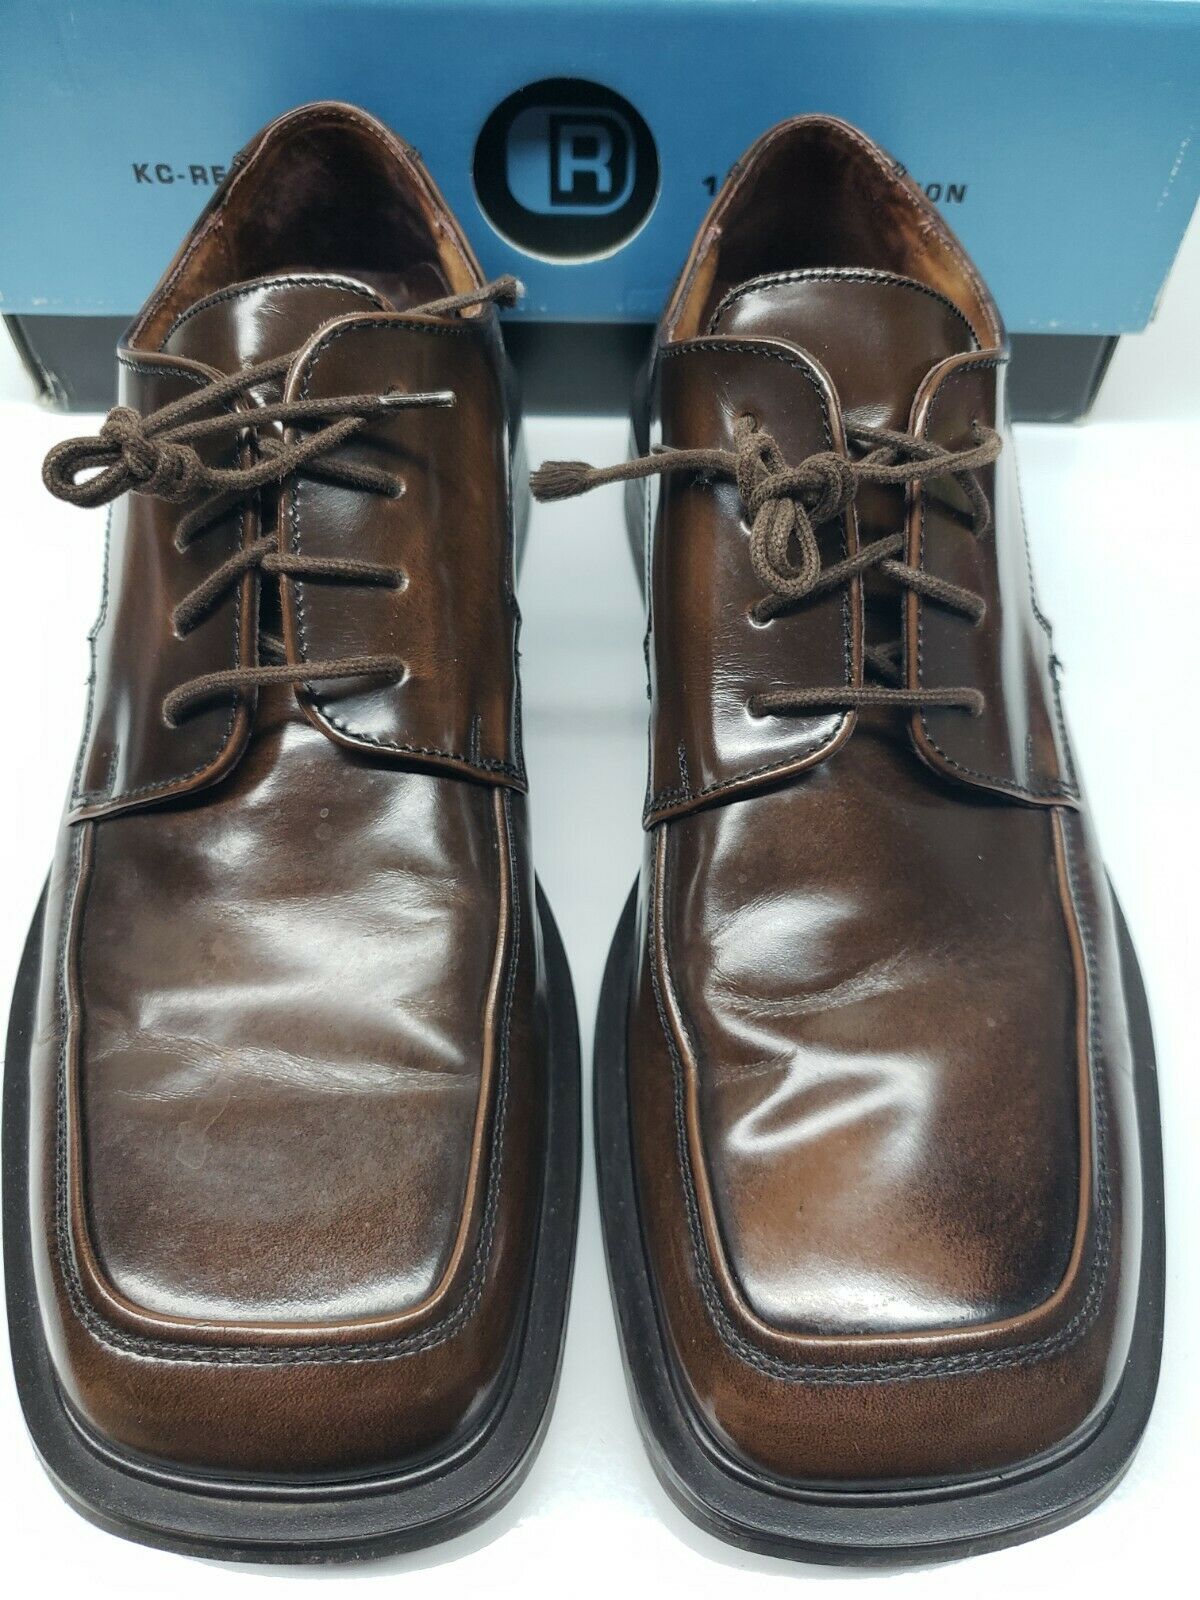 Kenneth Cole Reaction Mens Leather Lace Up Brown Oxfords Dress Shoes Sz 10.5 MED